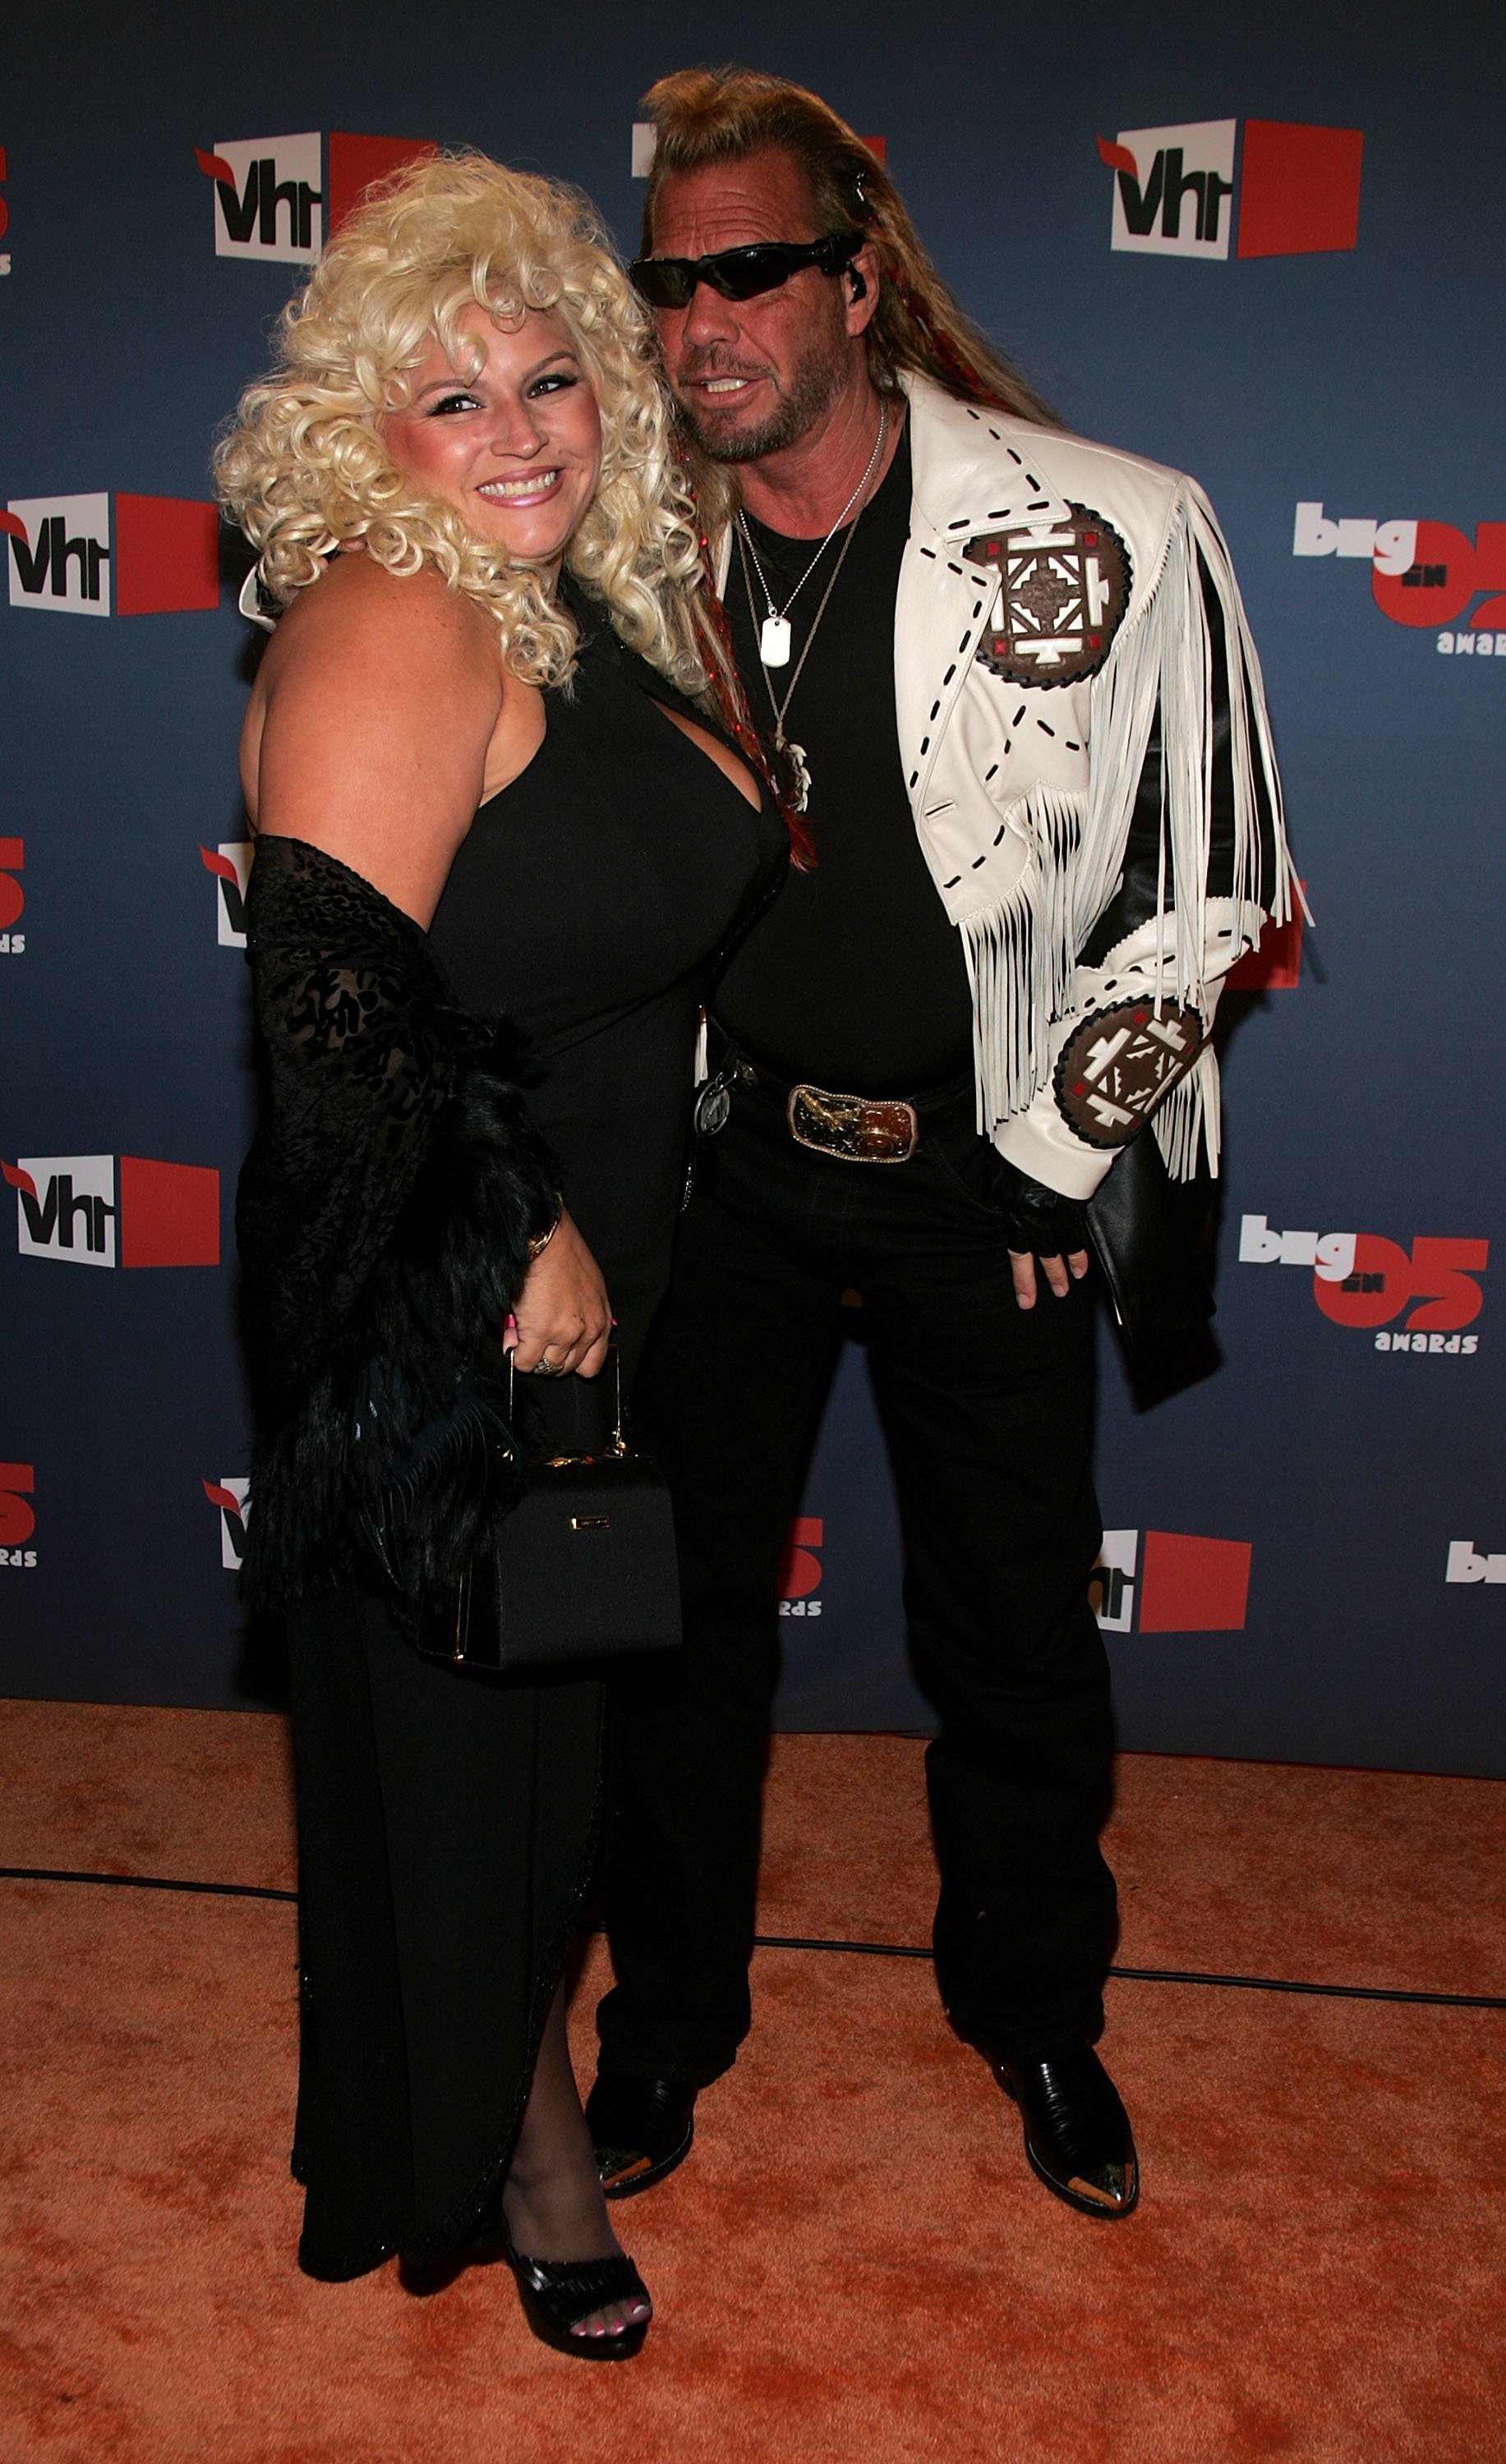 Bounty Hunter Duane "Dog" Chapman (R) and Beth Chapman arrive at the VH1 Big In '05 Awards held at Stage 15 on the Sony lot on December 3, 2005 | Photo: Getty Images